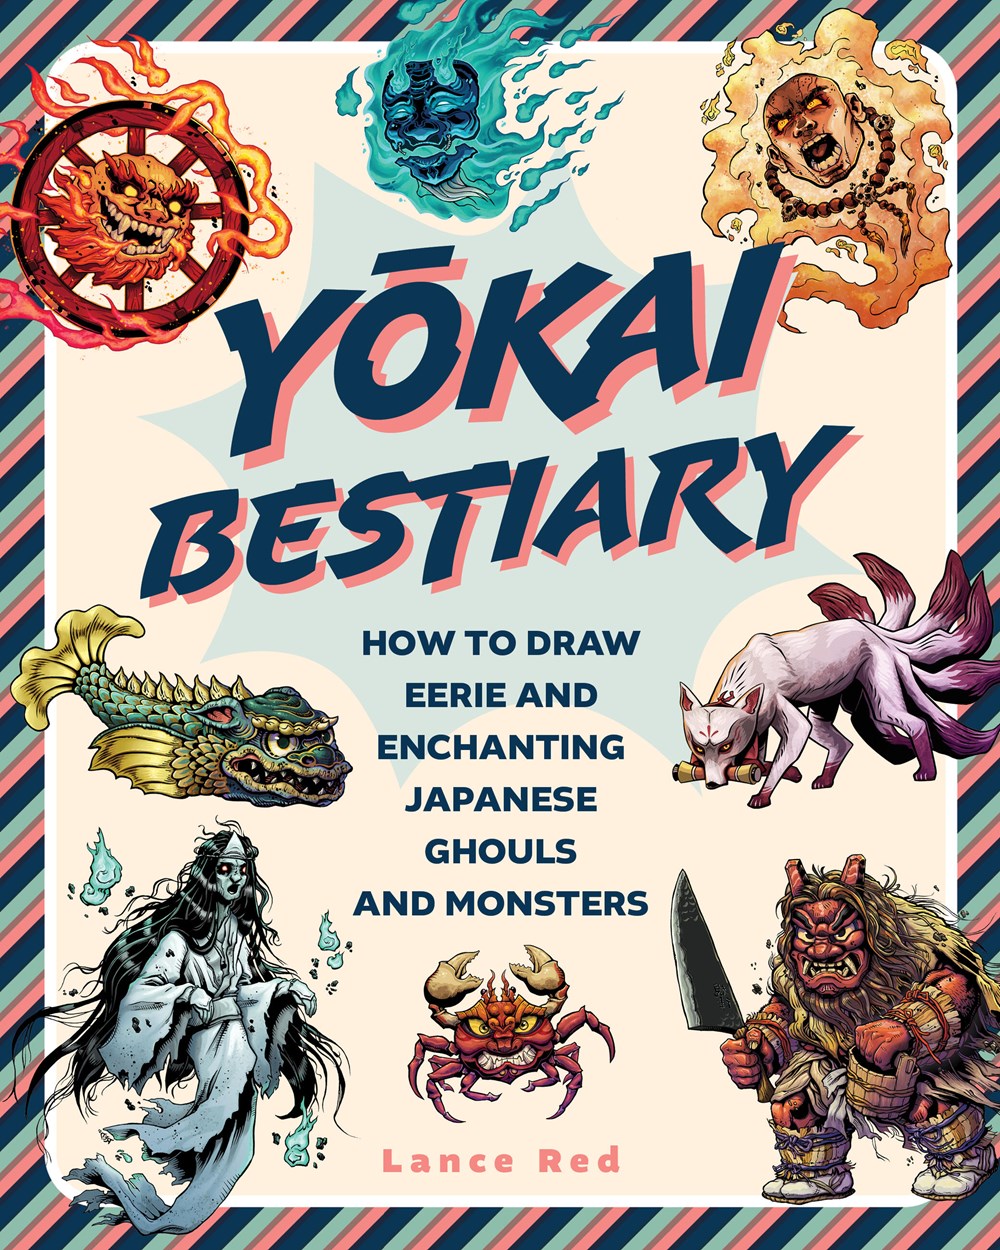 Yokai Bestiary: How To Draw Eerie and Enchanting Japanese Ghosts and Monsters